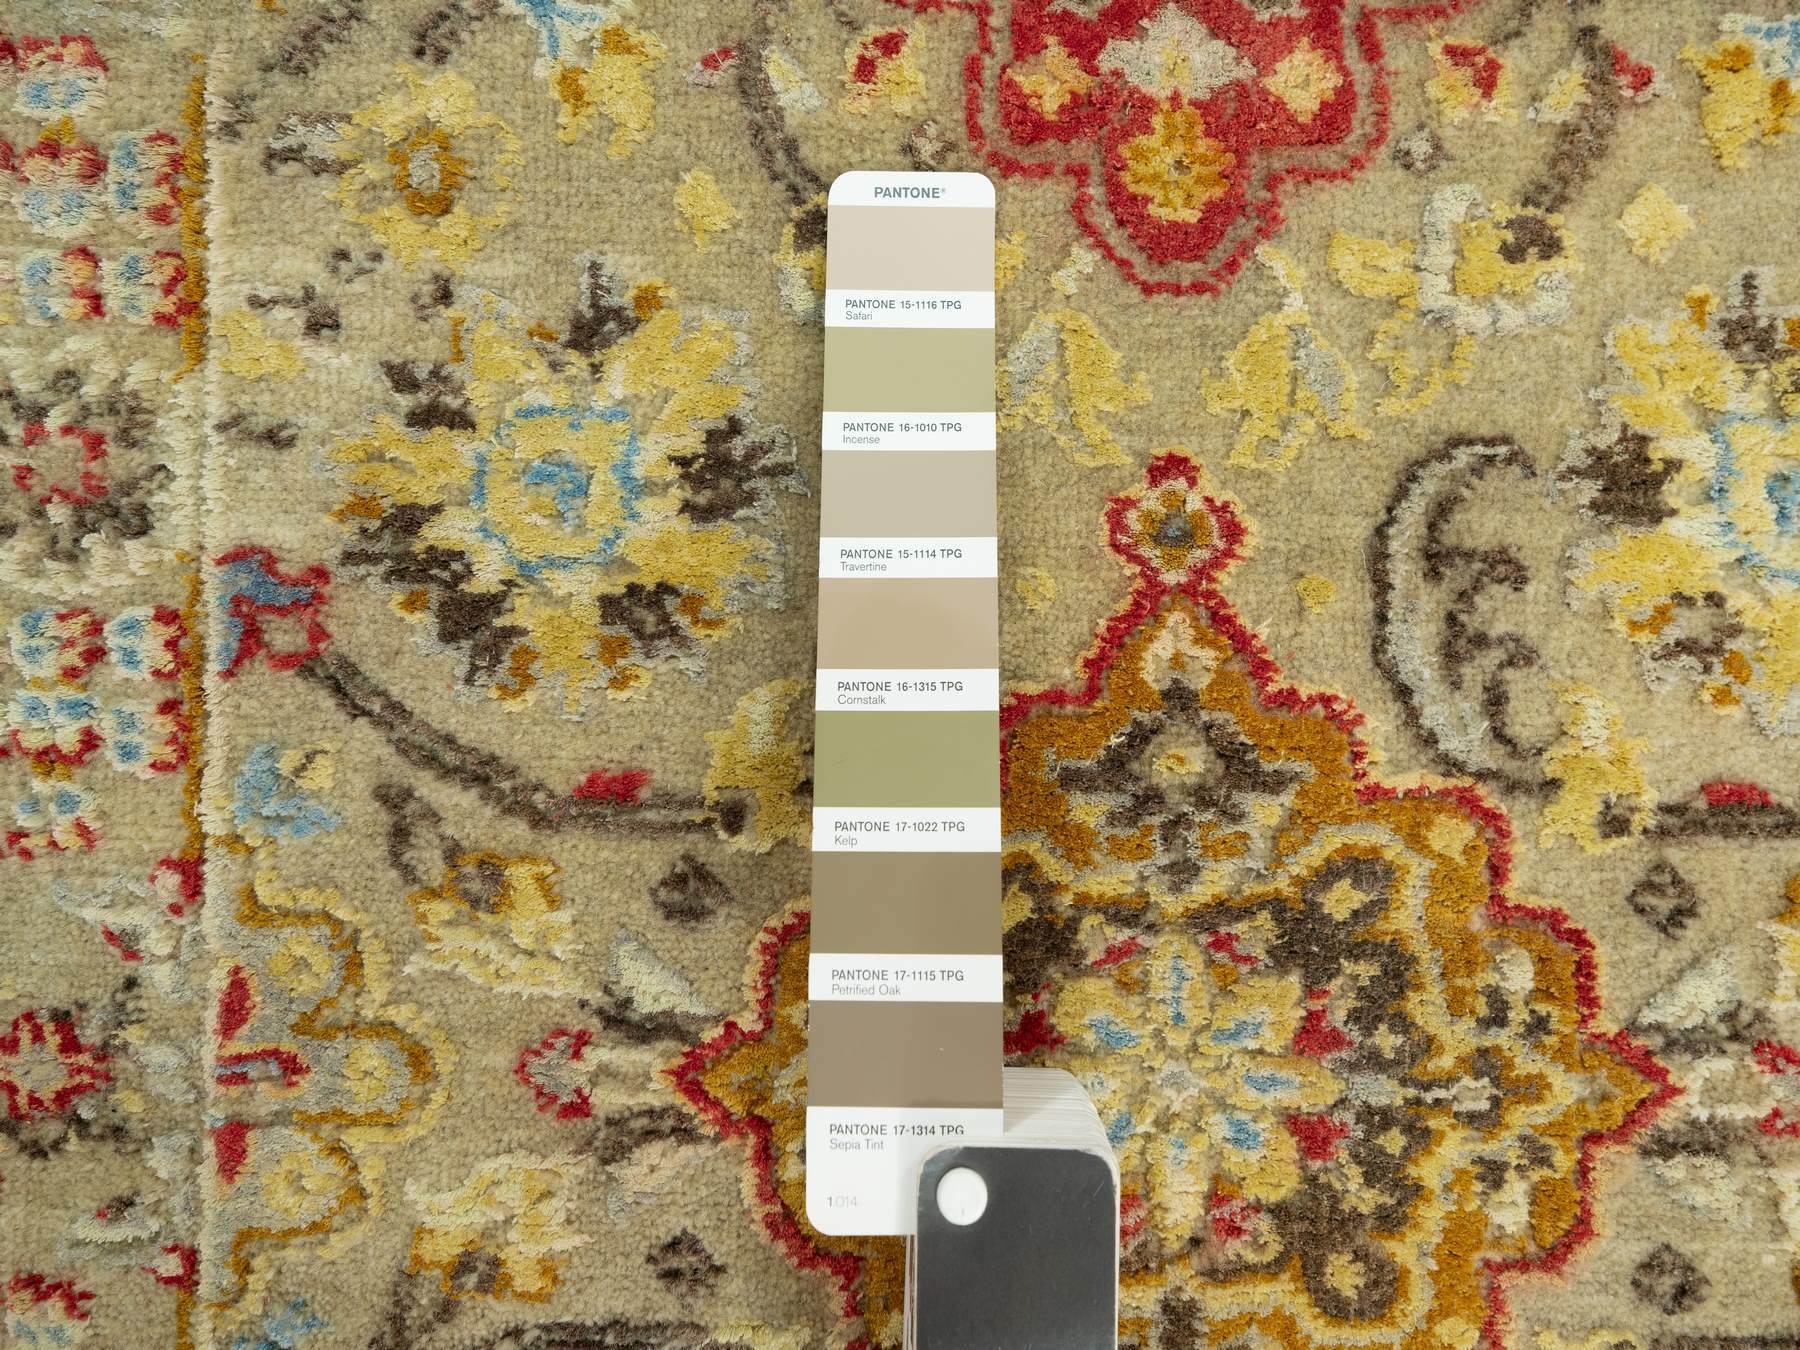 TransitionalRugs ORC814698